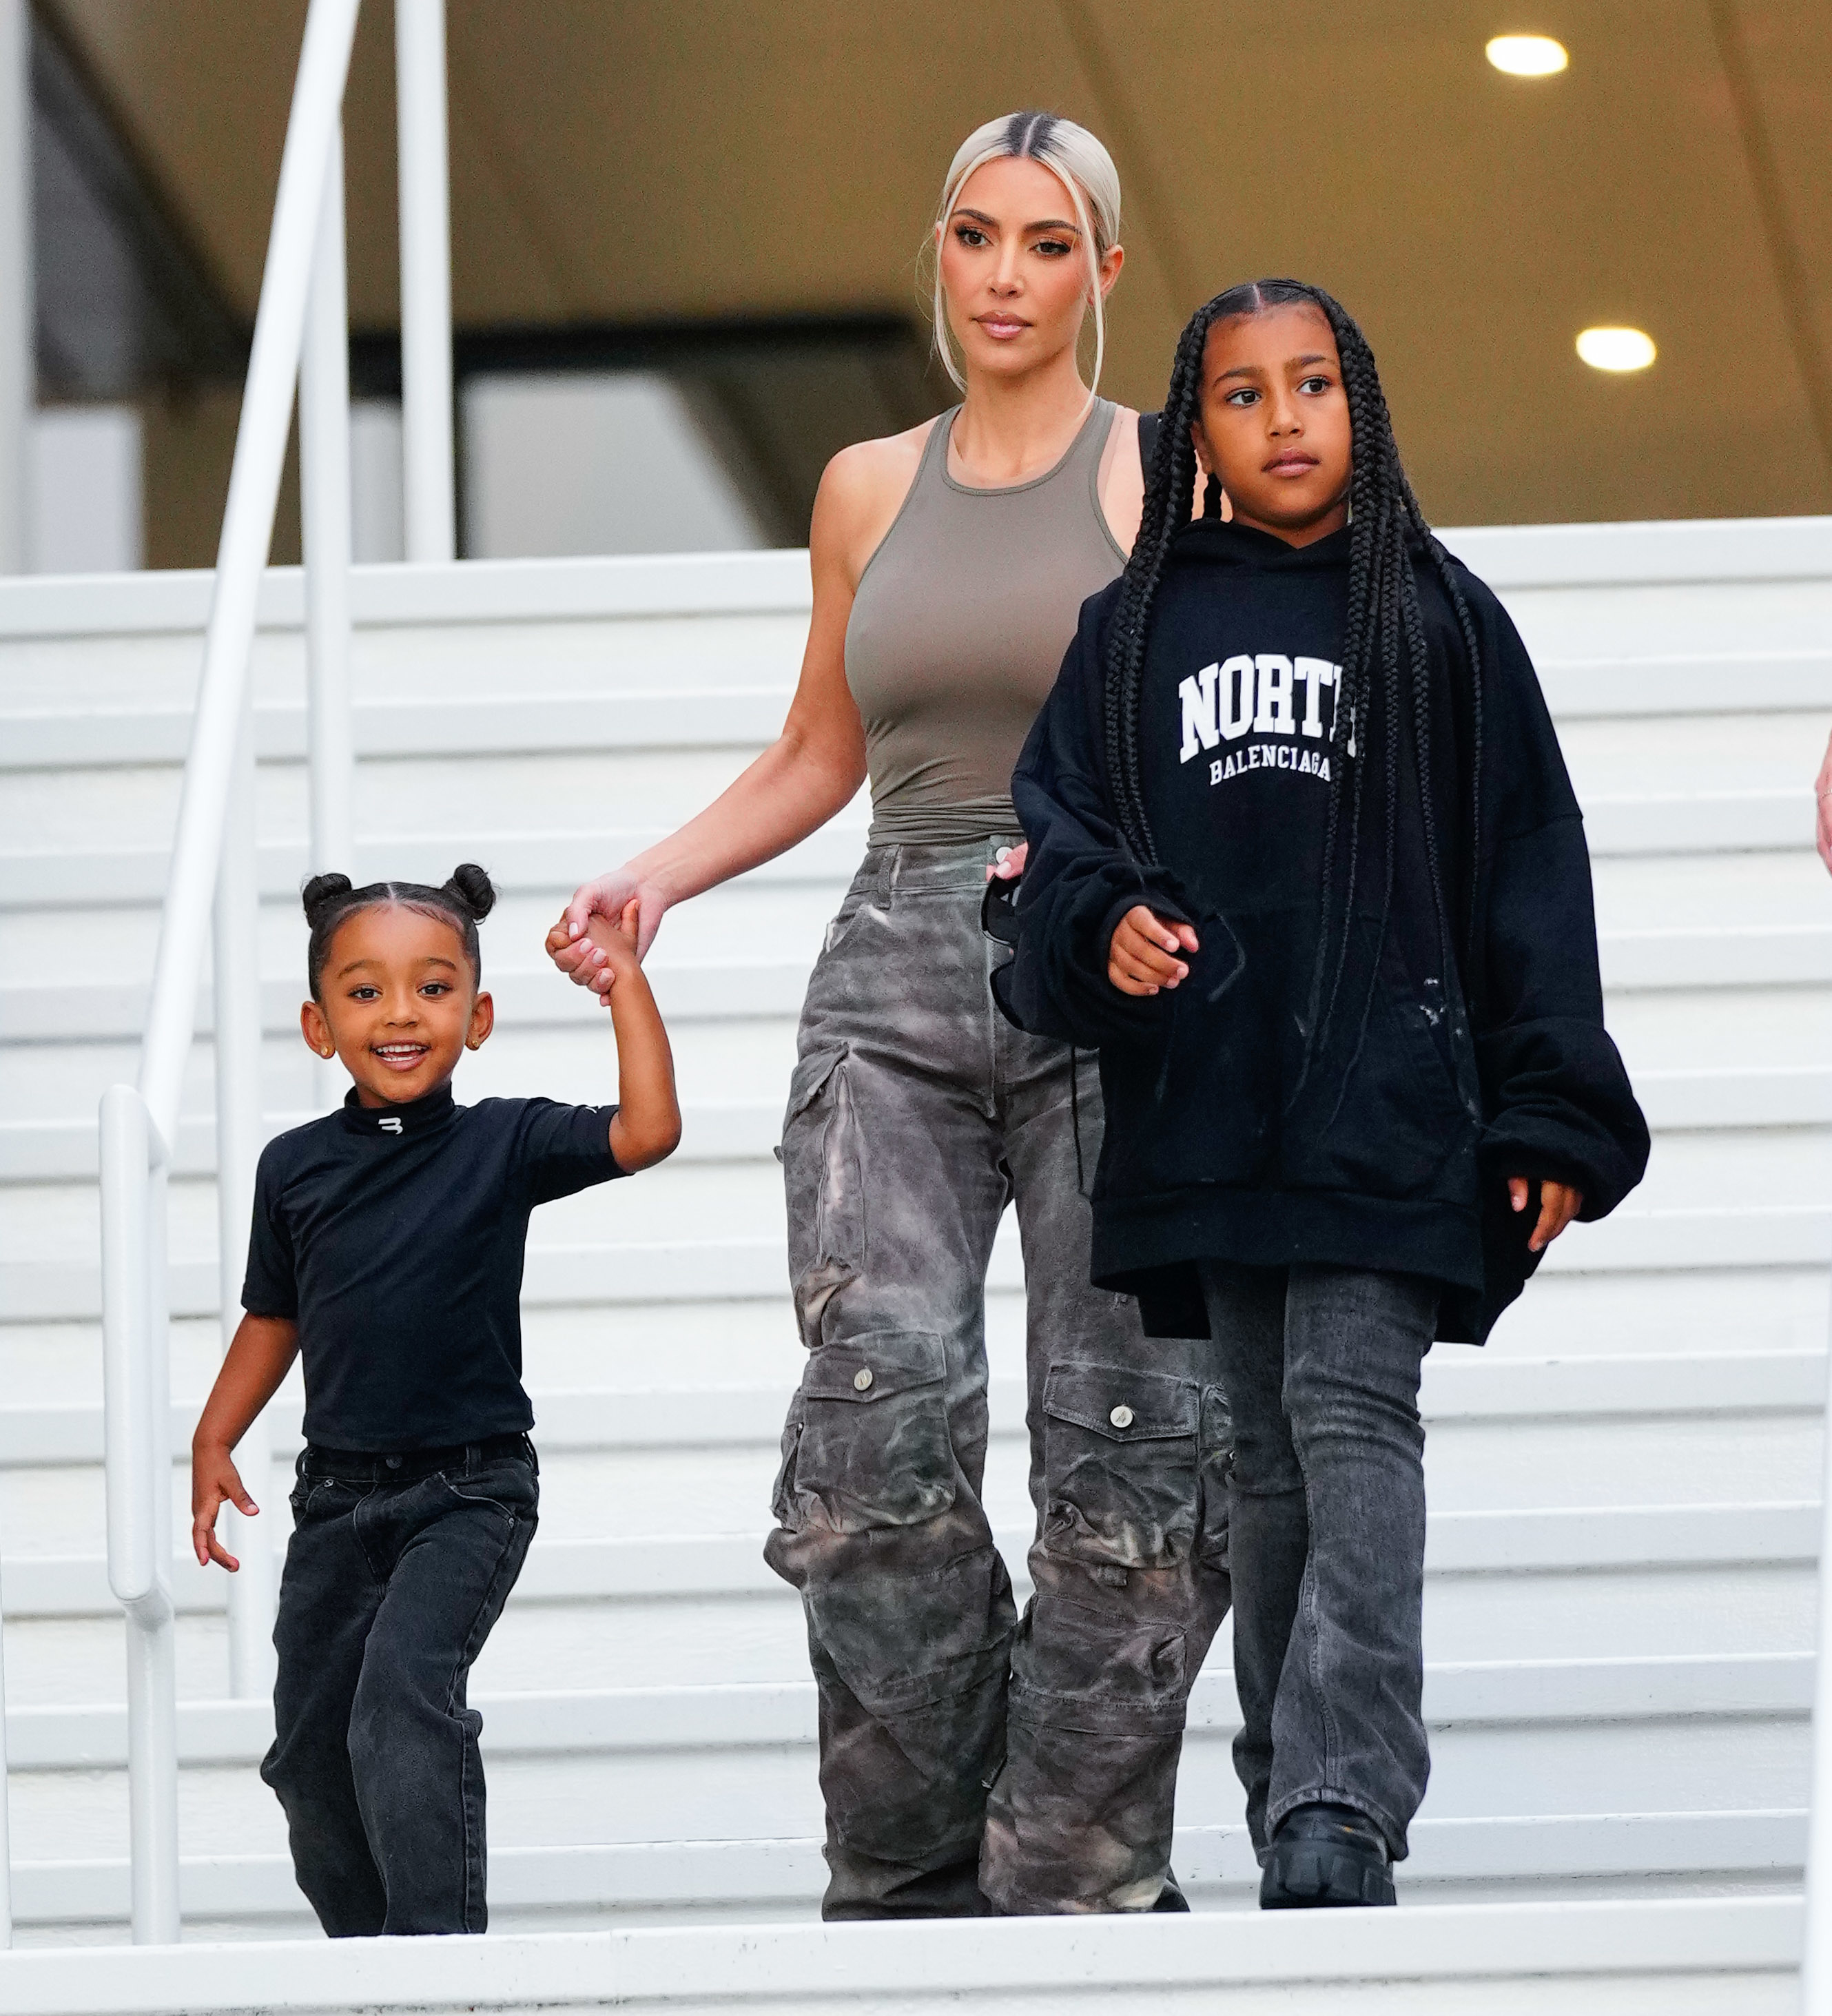 Kim with two of her children, including North, walking down steps